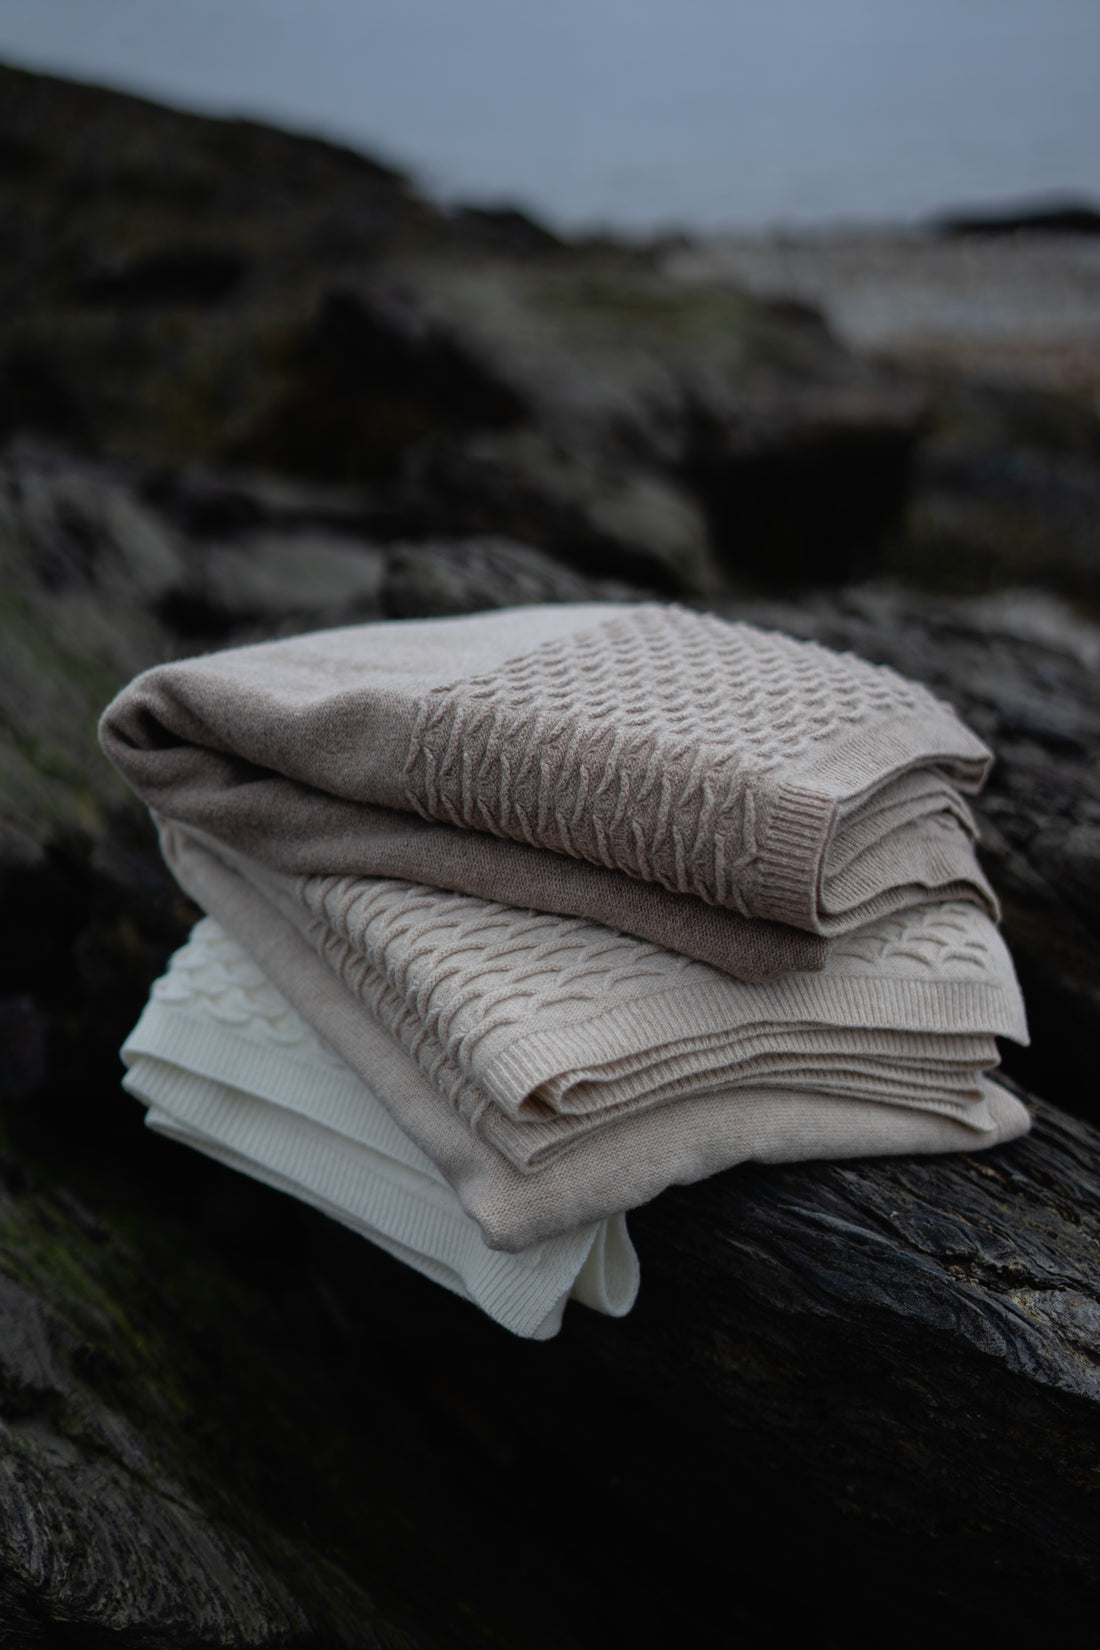 A folded stack of Evangeline Knit 100% soft lambswool throws, featuring a scalloped detail. Stack includes Coffee, Oatmeal, and Pearl (top to bottom). Super soft 'hand' of lambswool. Unique scallop texture. Has the energy of a treasured knit sweater.